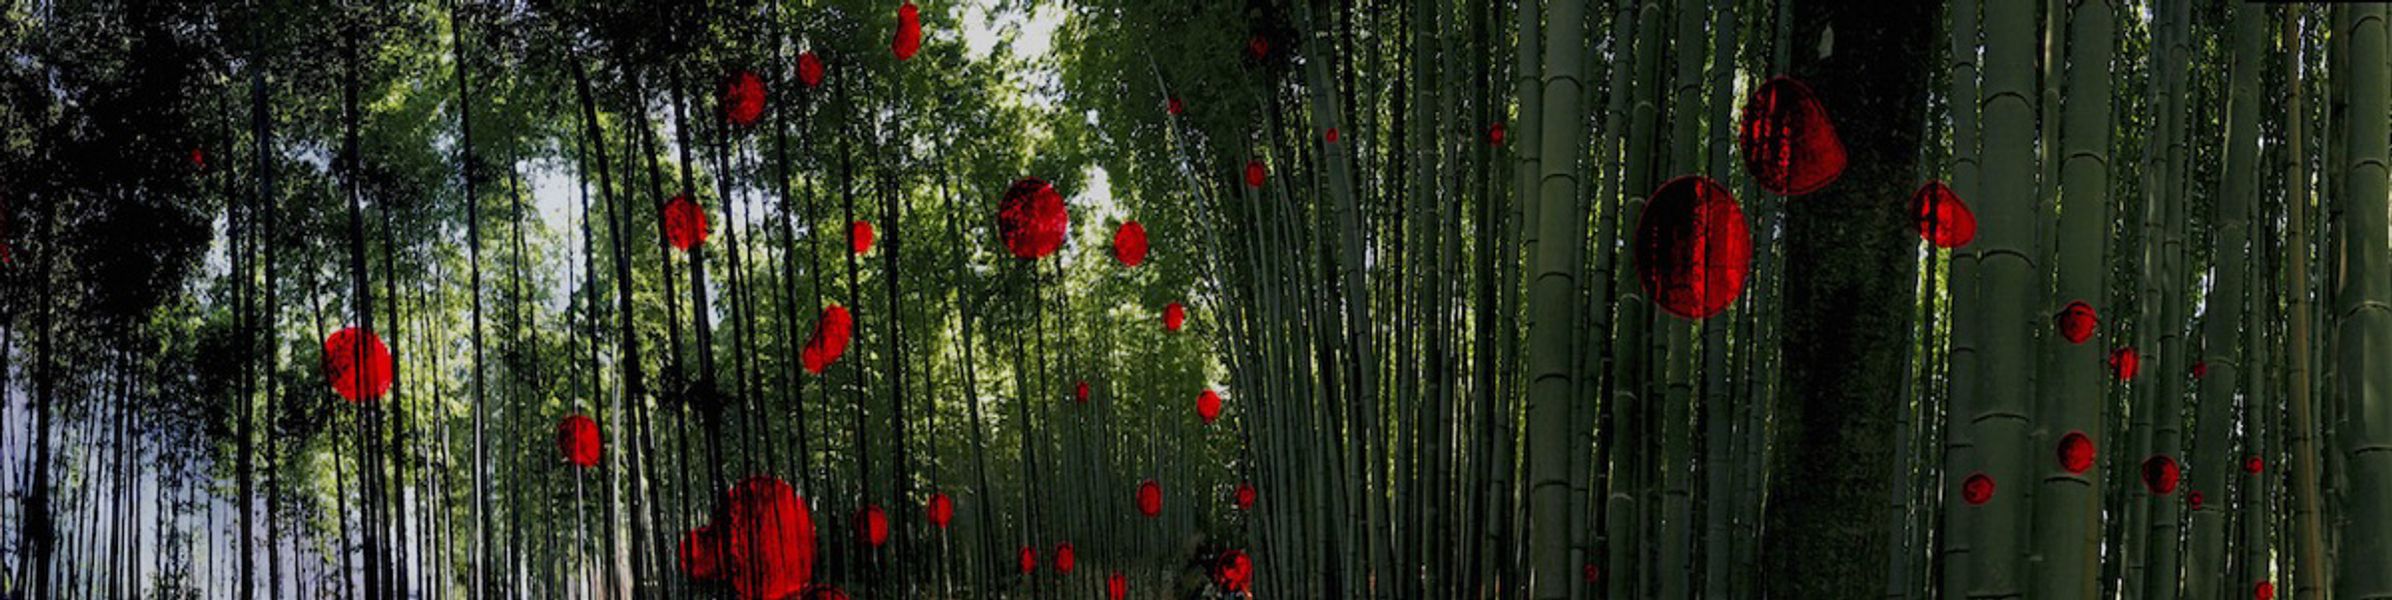 Delia Dickmann abstract photography panorama bamboo with red circles